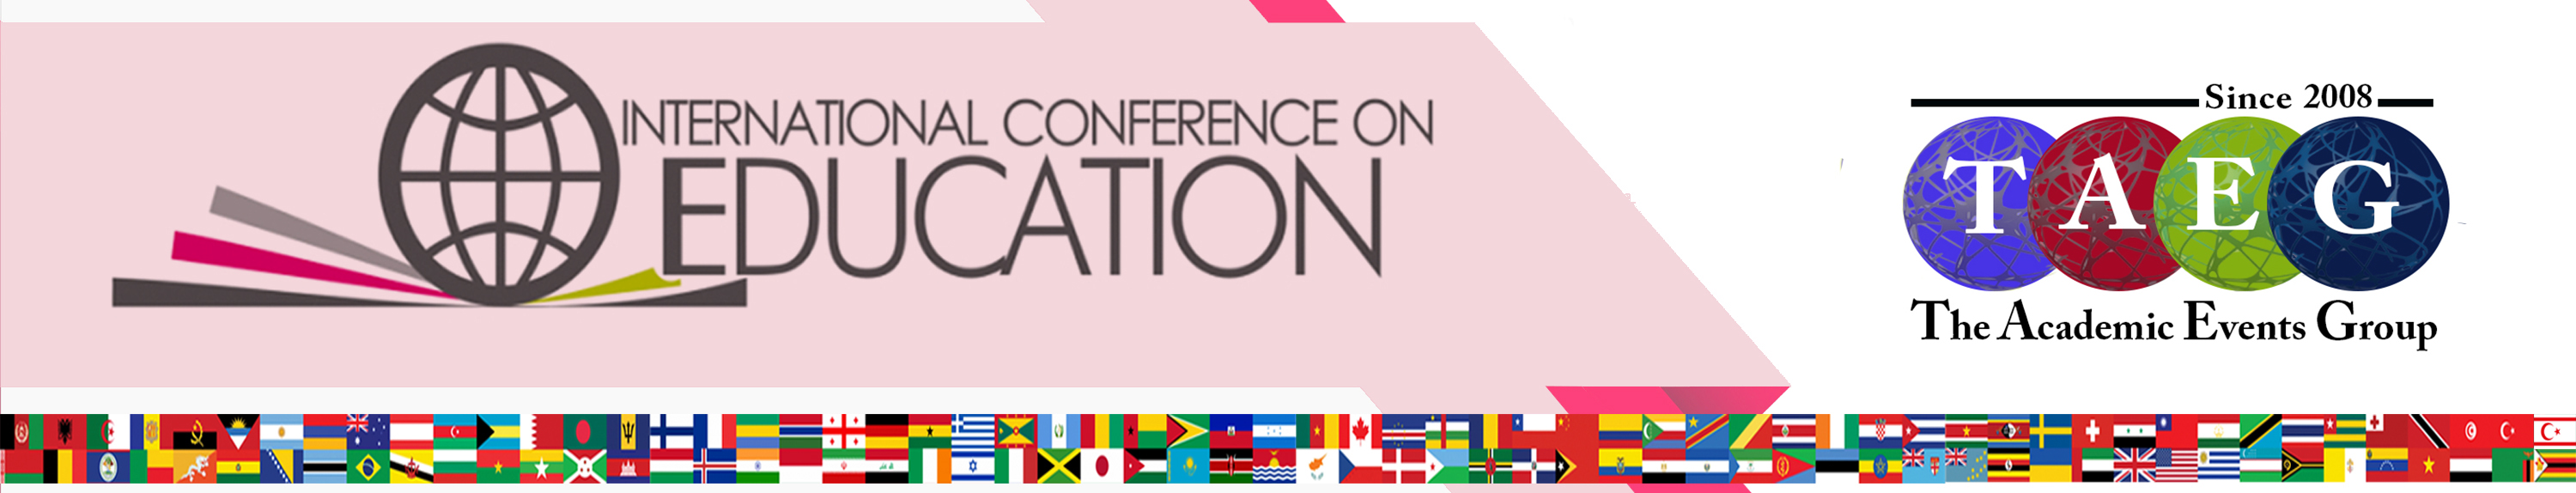 INTERNATIONAL CONFERENCE ON  EDUCATION